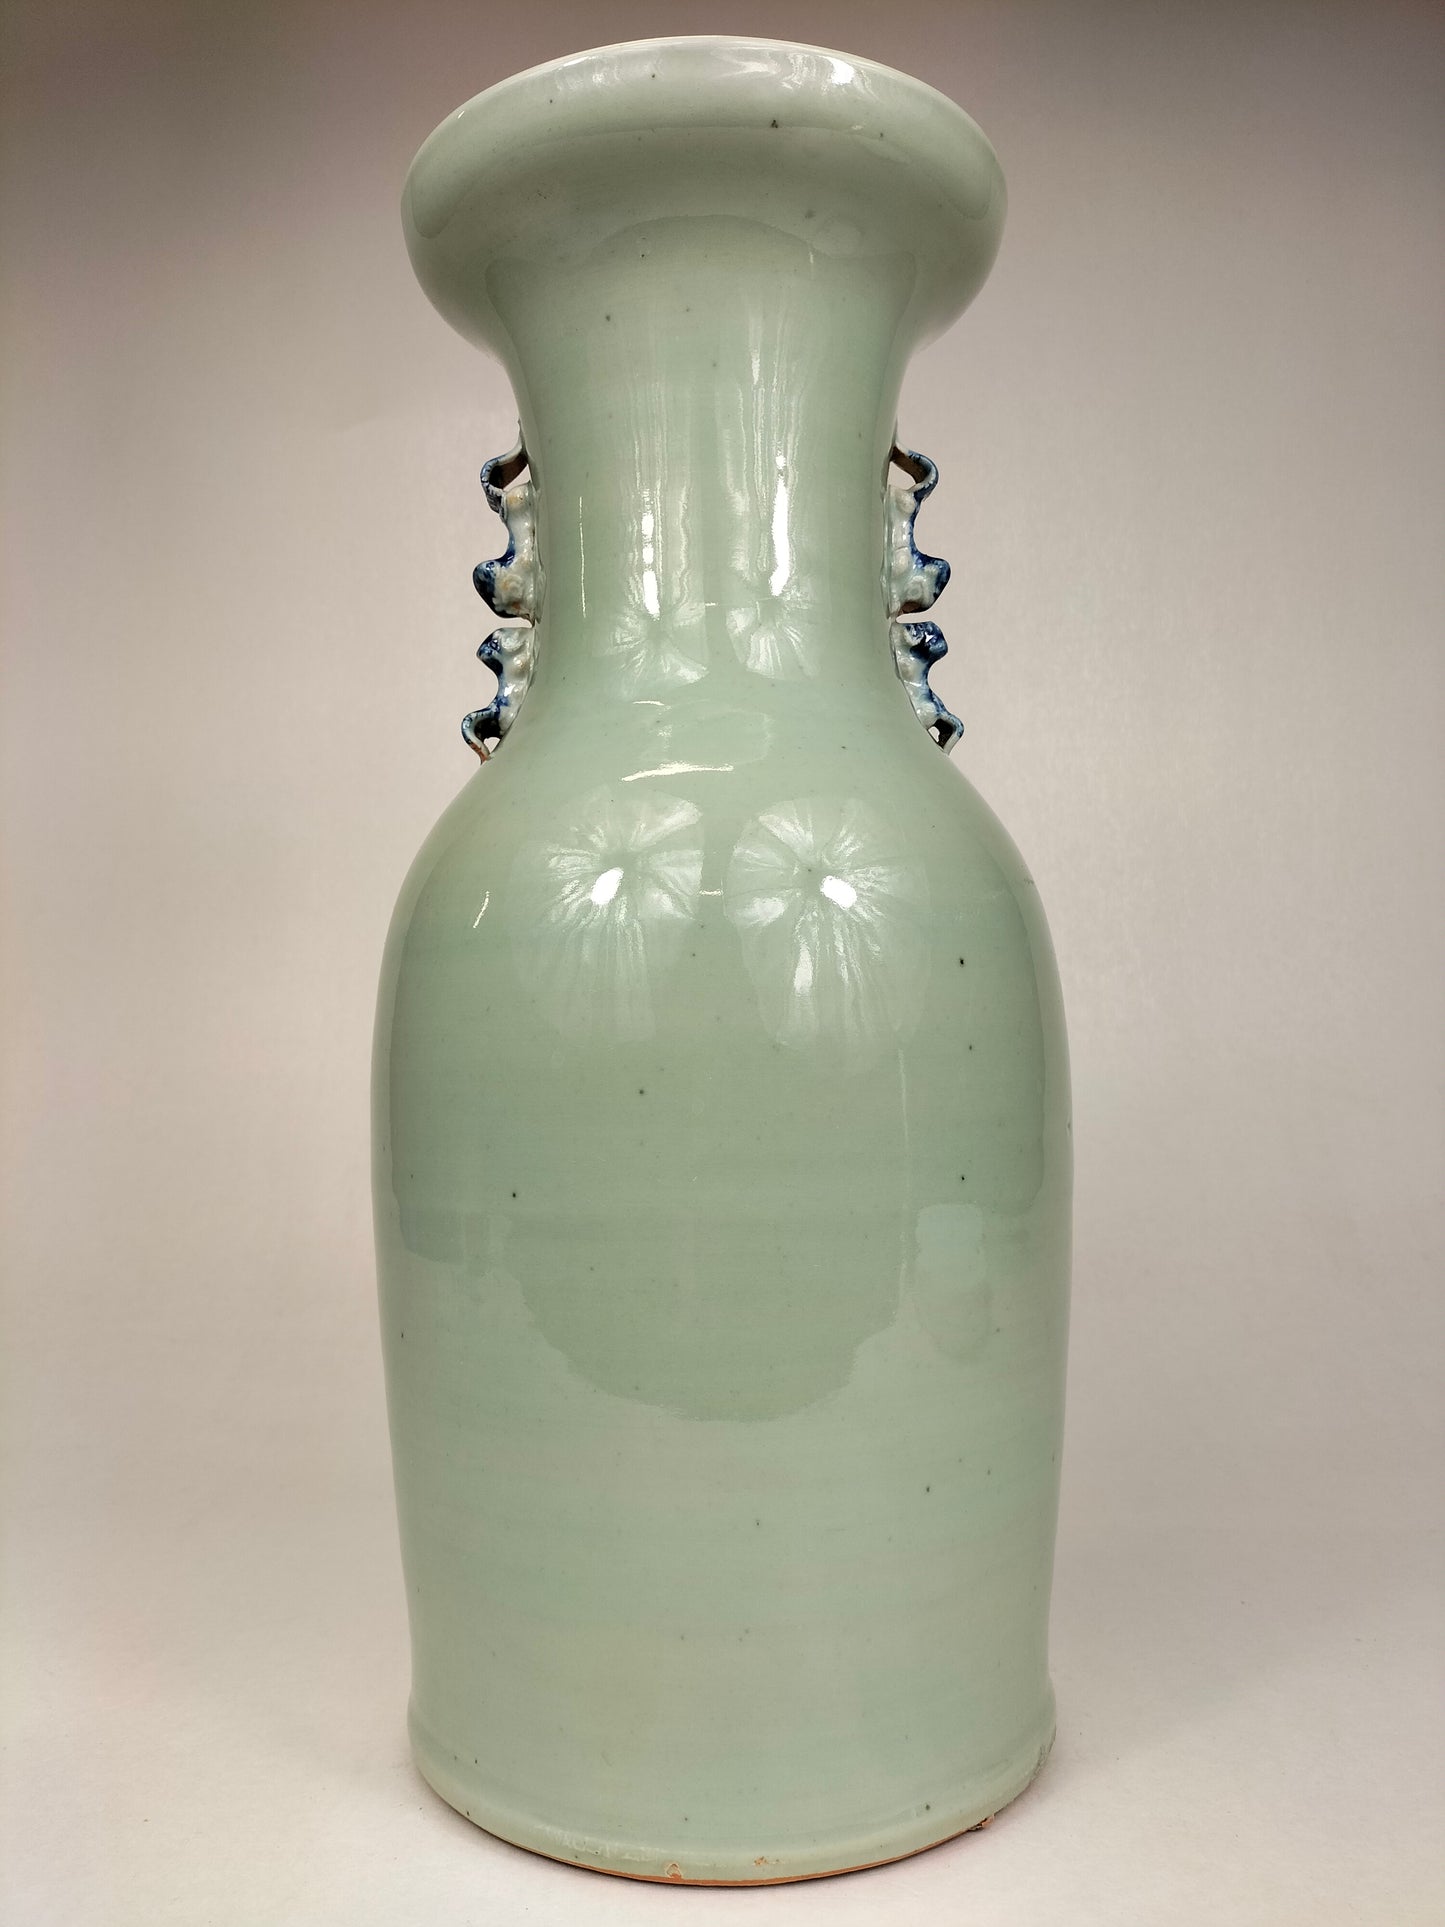 Antique Chinese celadon vase decorated with lotuses // Qing Dynastie - 19th century